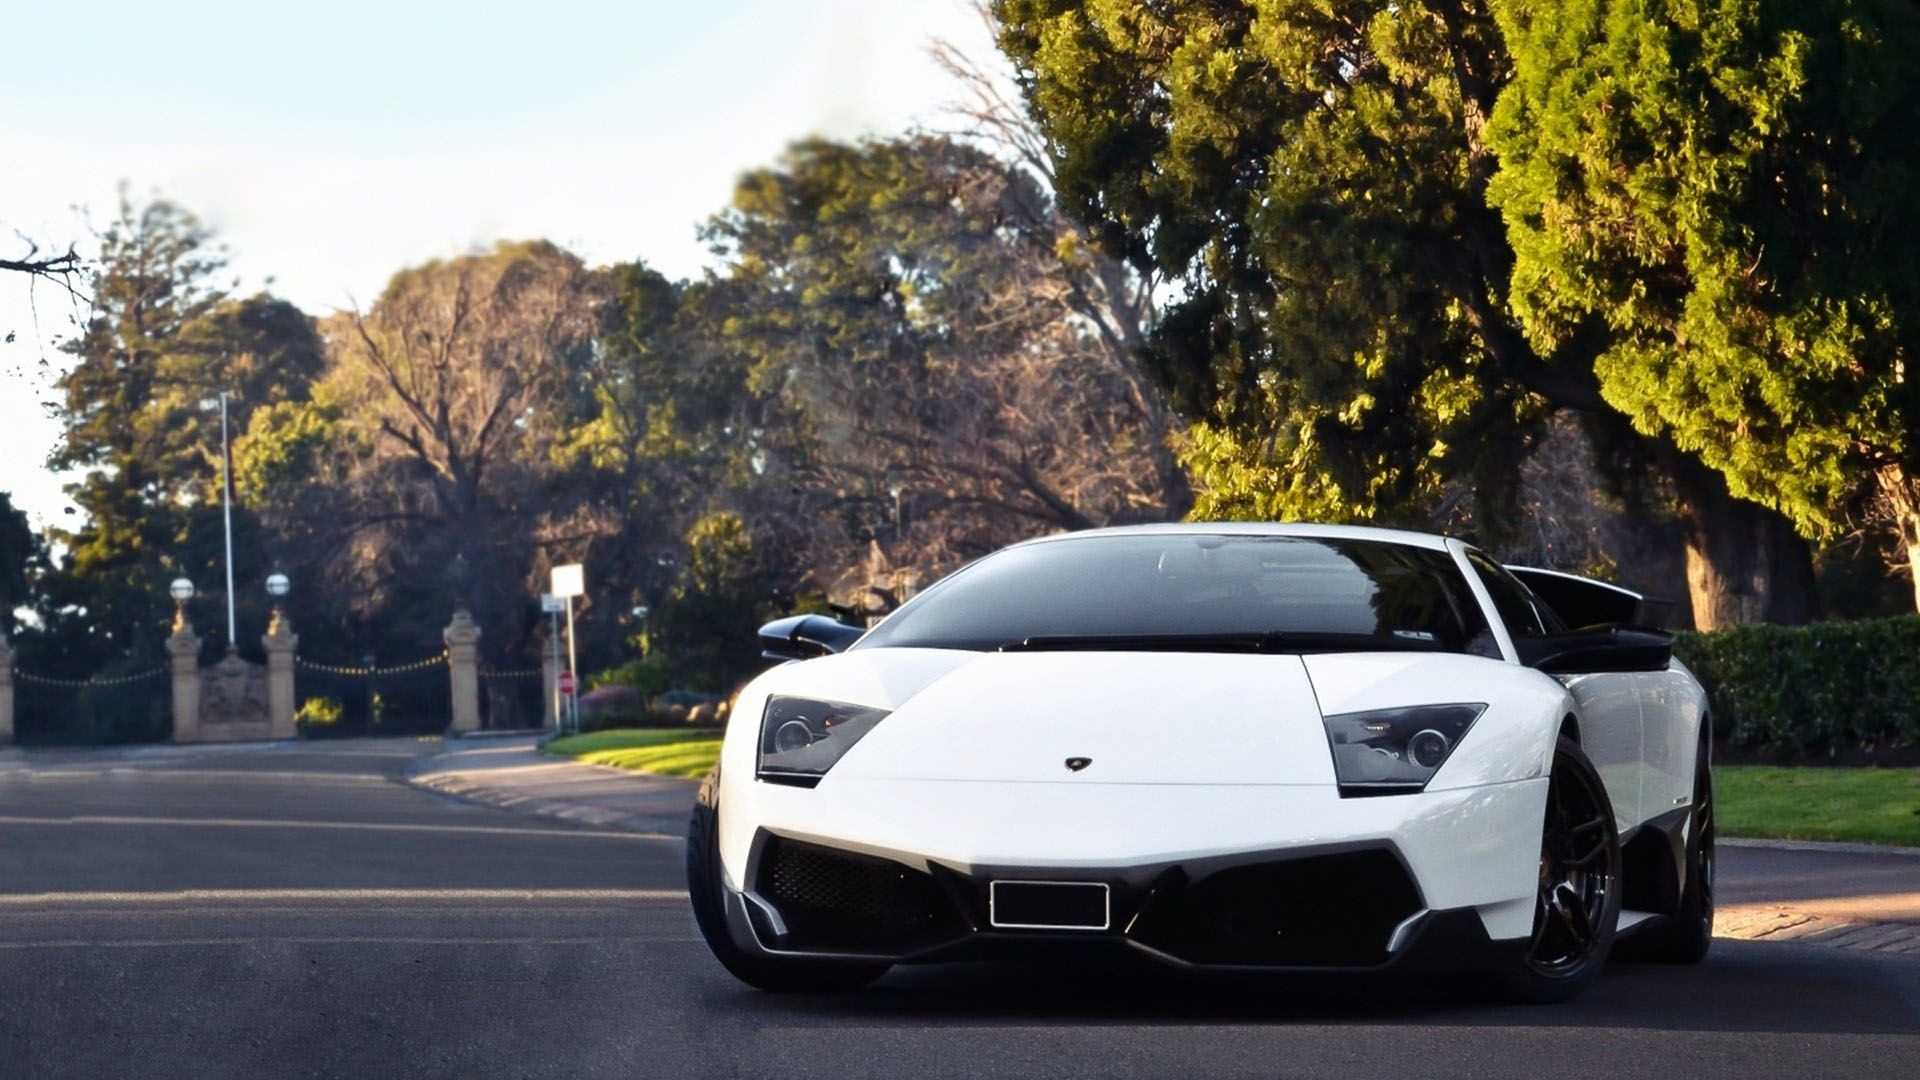 1920x1080 Lamborghini Wallpapers HD Android Apps on Google Play 1920Ã1080 Lamborghini  Pictures Wallpapers (29